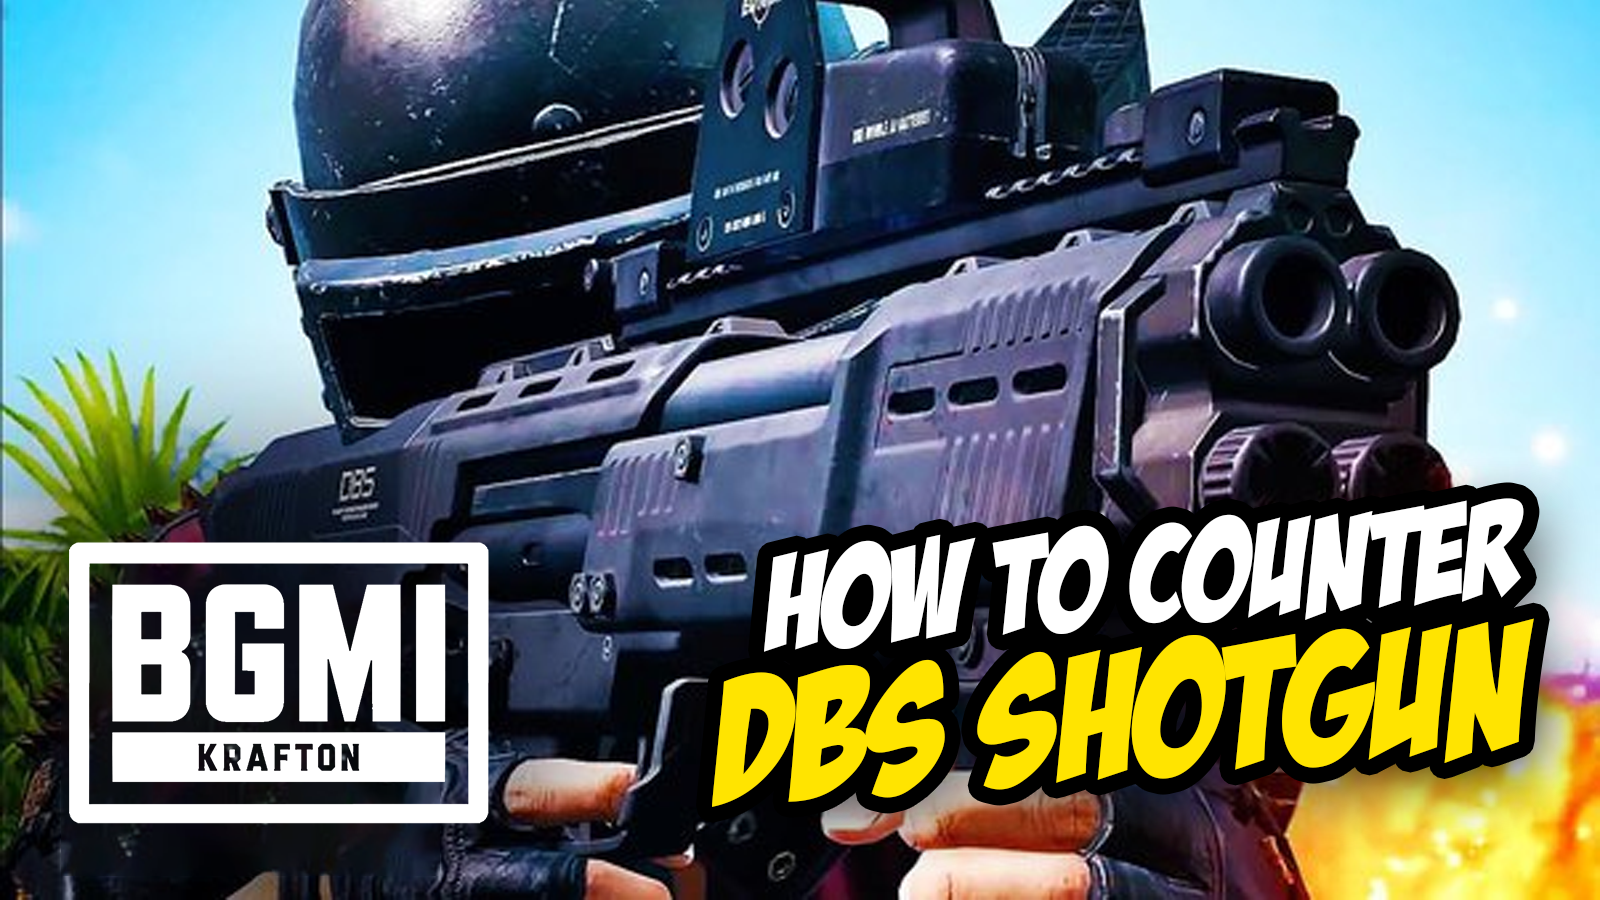 Mastering PUBG/BGMI: How to Counter the DBS Shotgun with Skillful Strategies